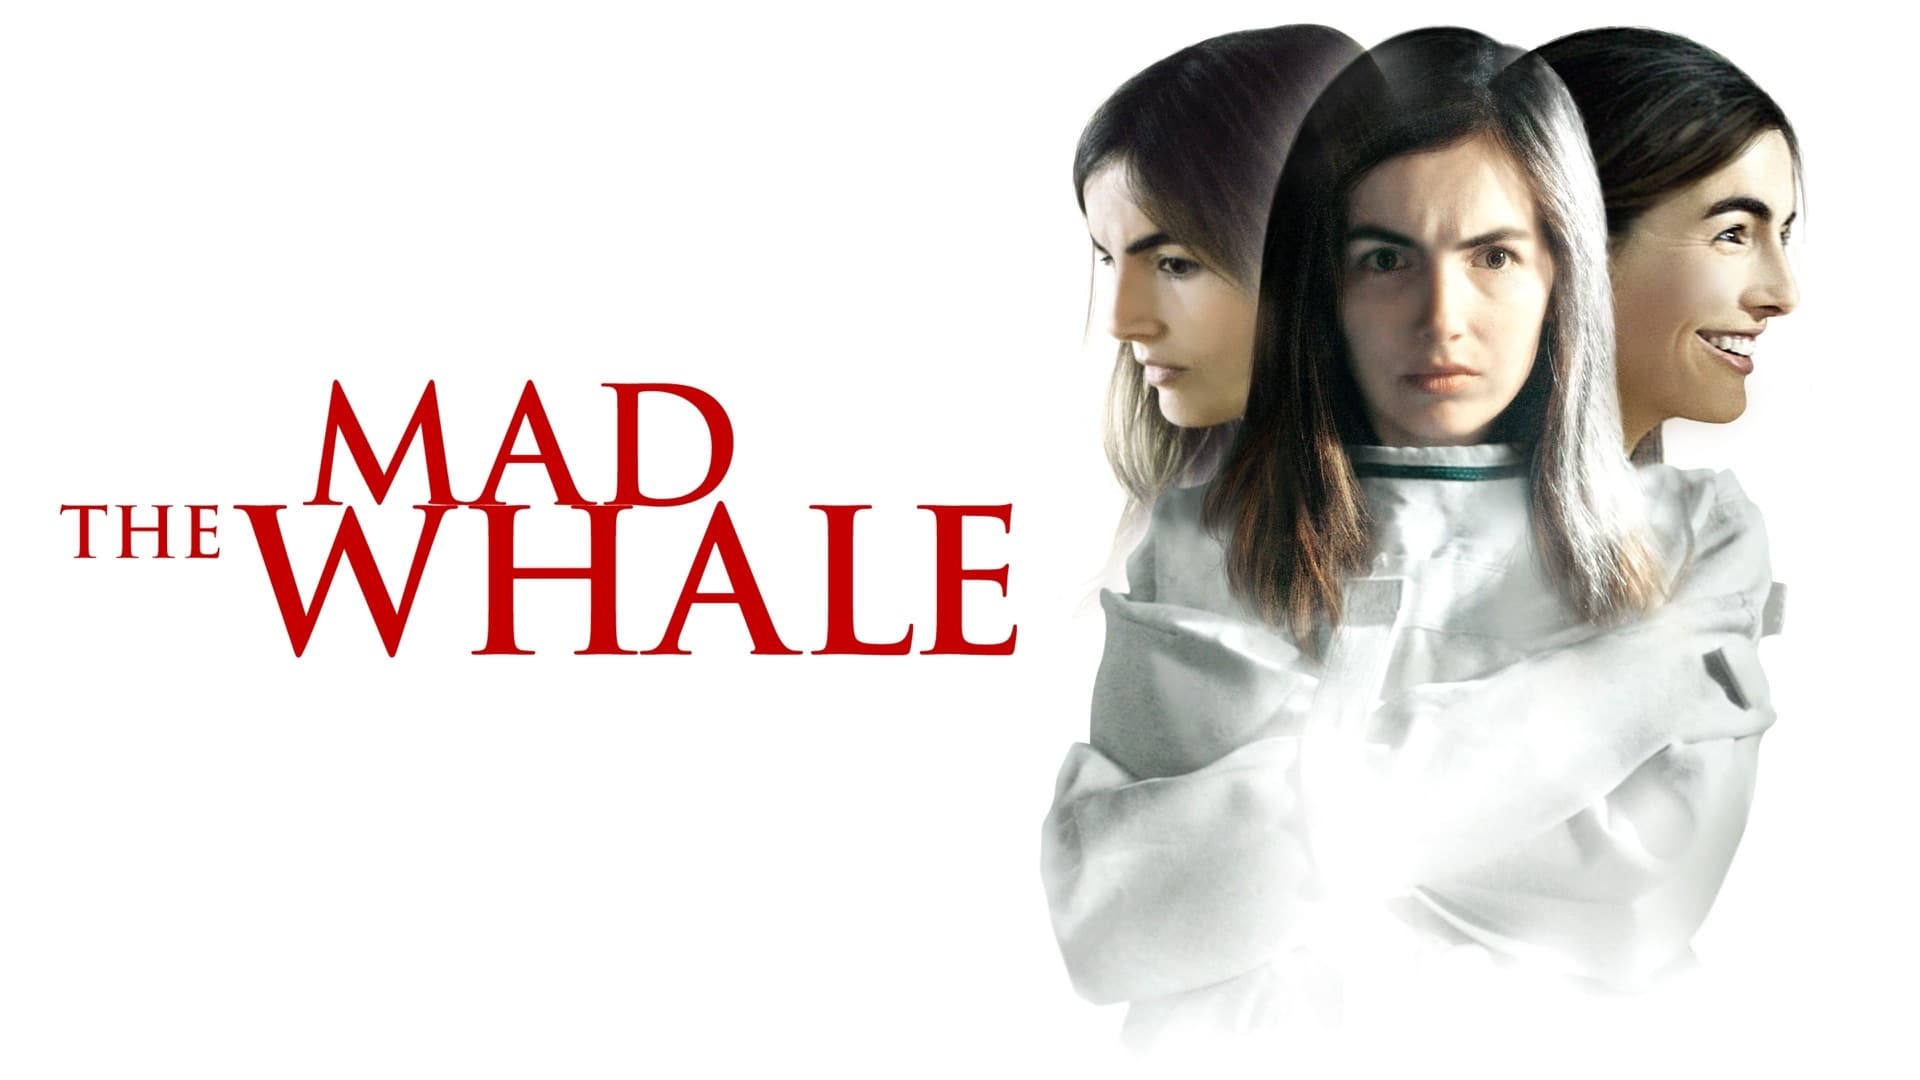 The Mad Whale